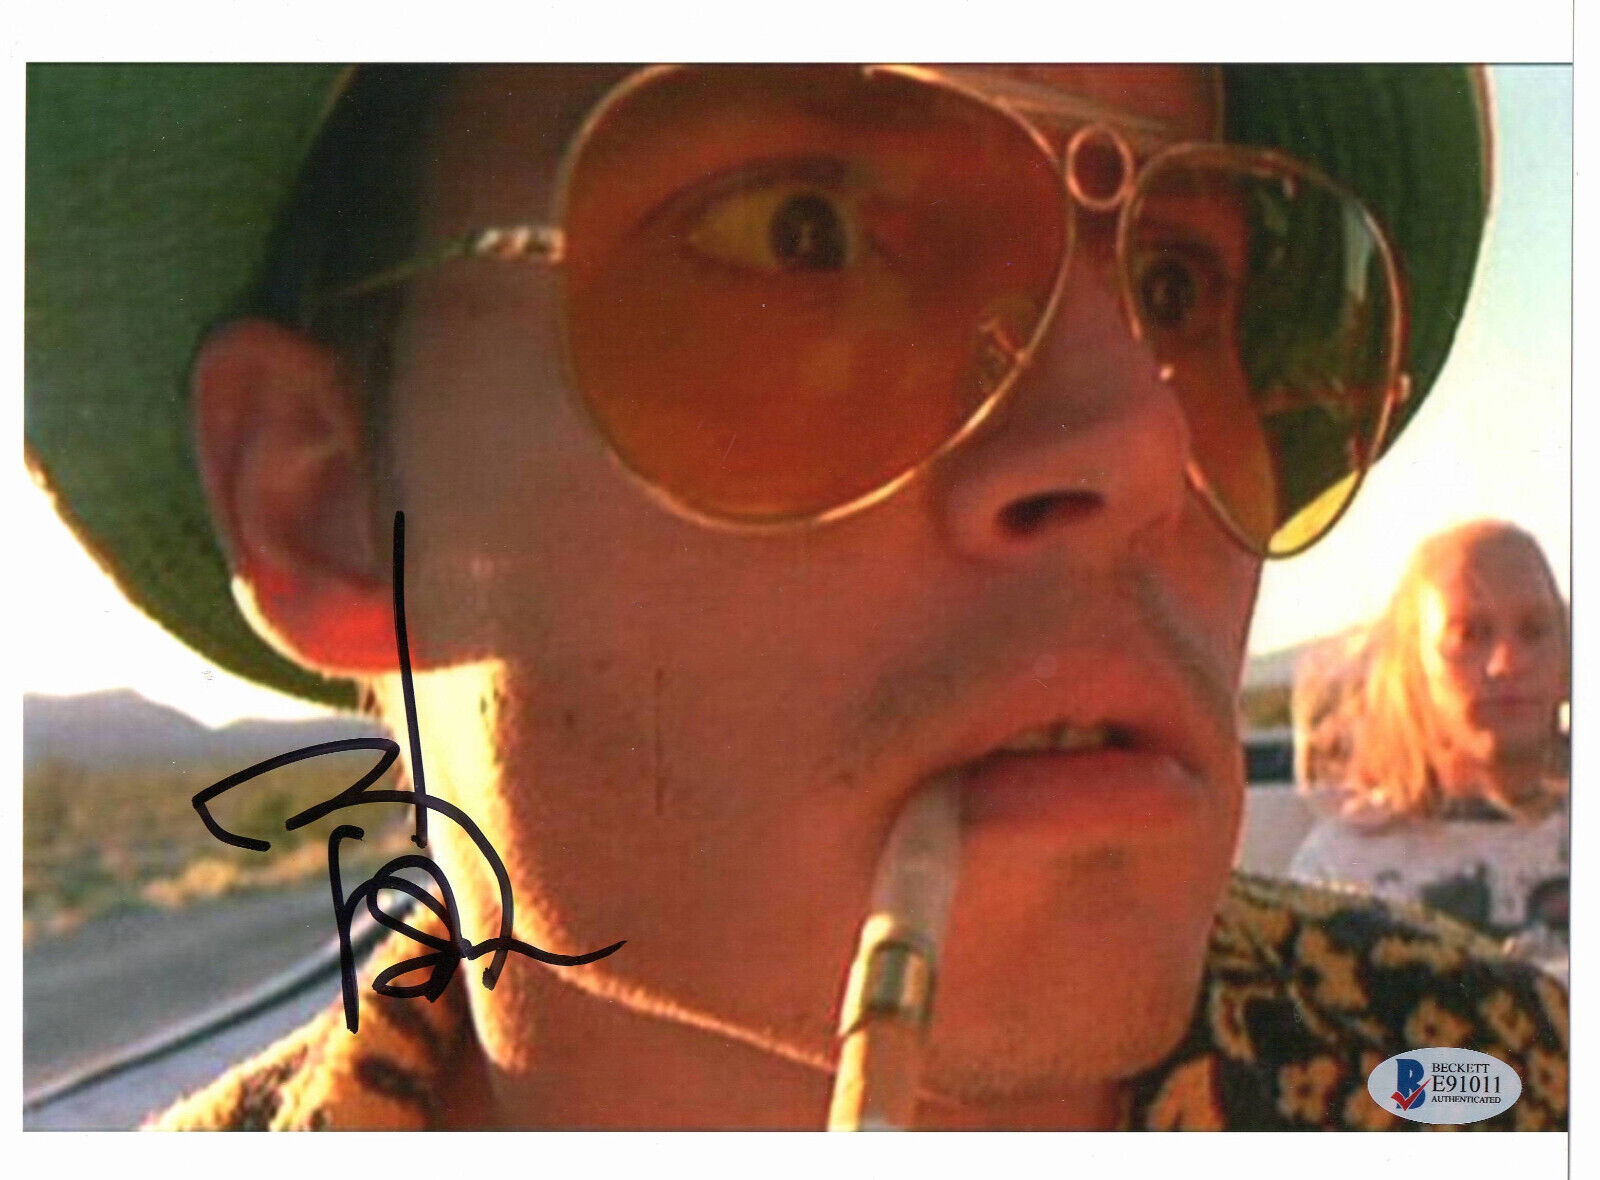 JOHNNY DEPP SIGNED FEAR AND LOATHING IN LAS VEGAS 8X10 PHOTO AUTOGRAPH BECKETT